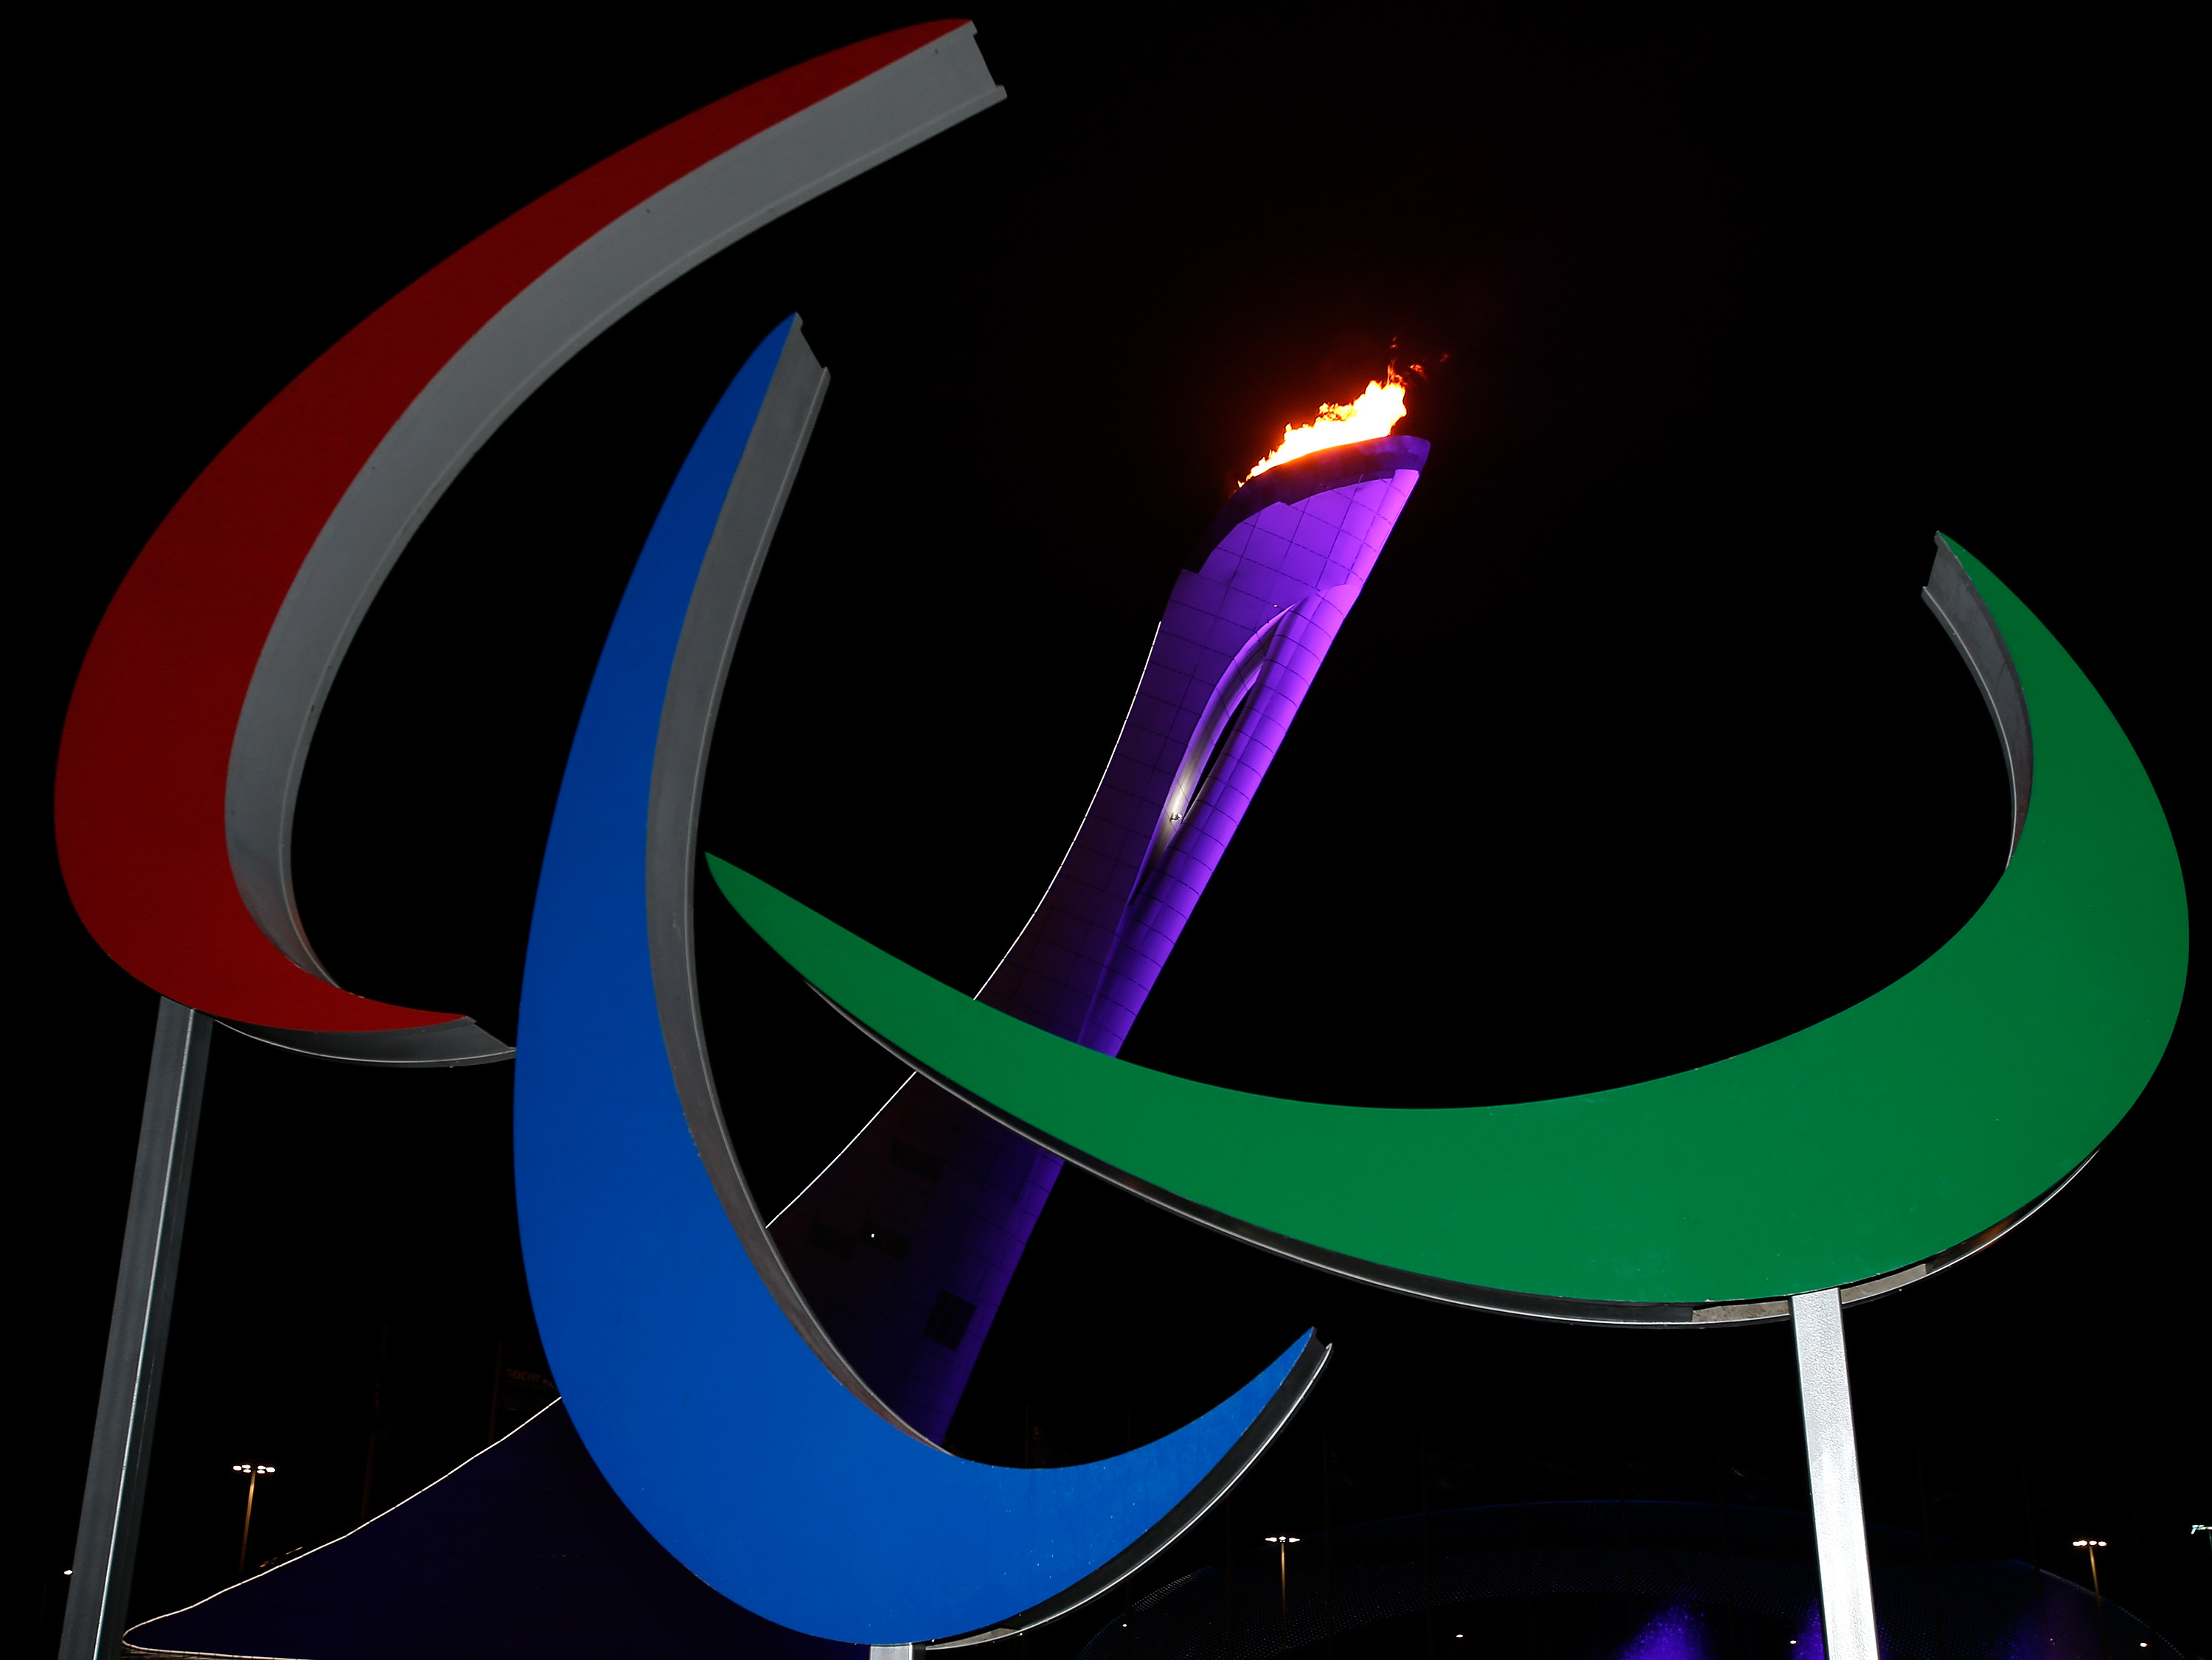 Five candidate cities for 2024 Olympic and Paralympic Games